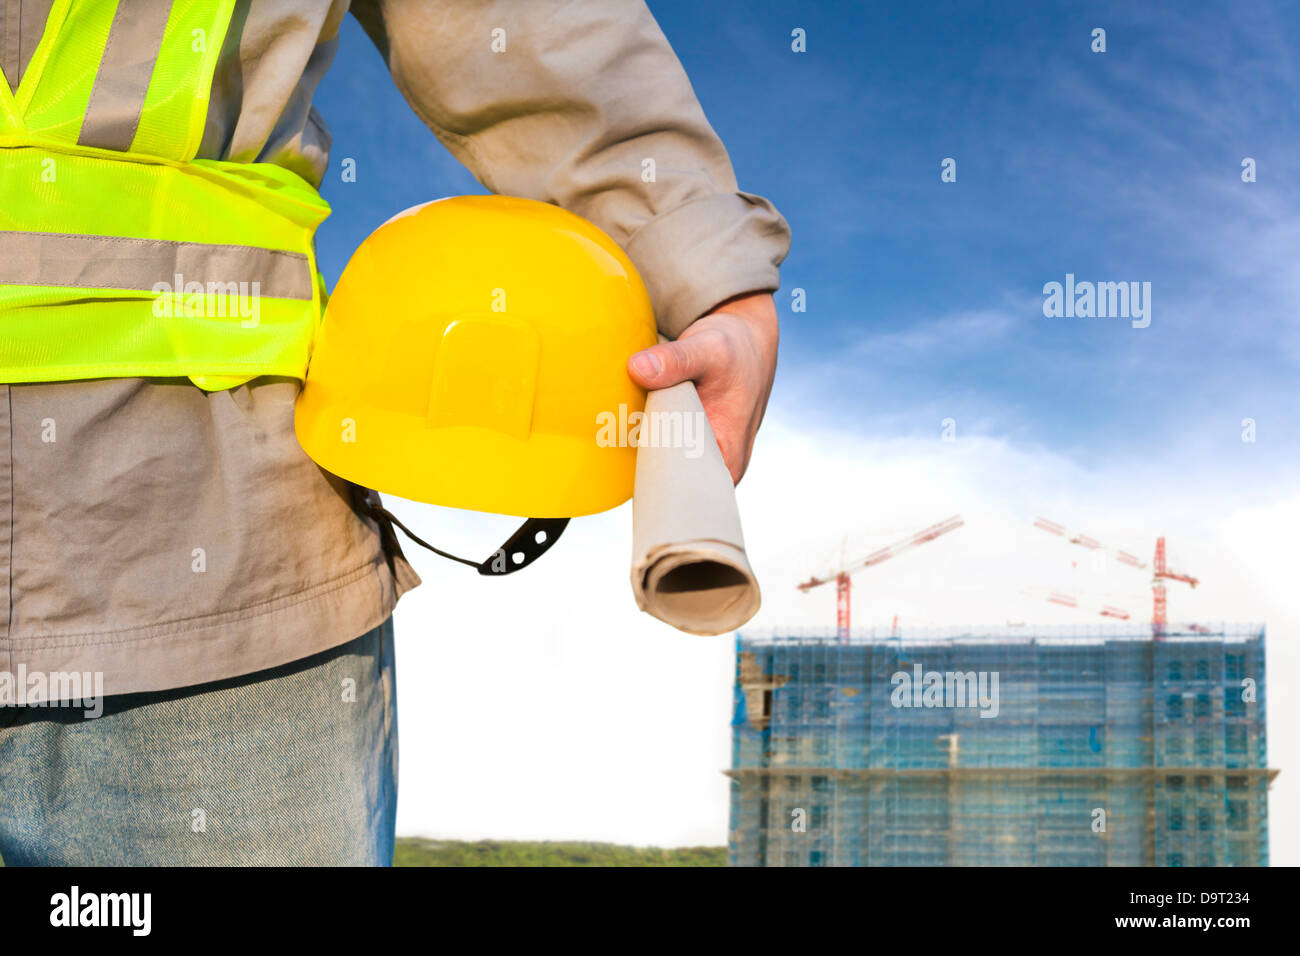 Construction building with worker holding hat Stock Photo